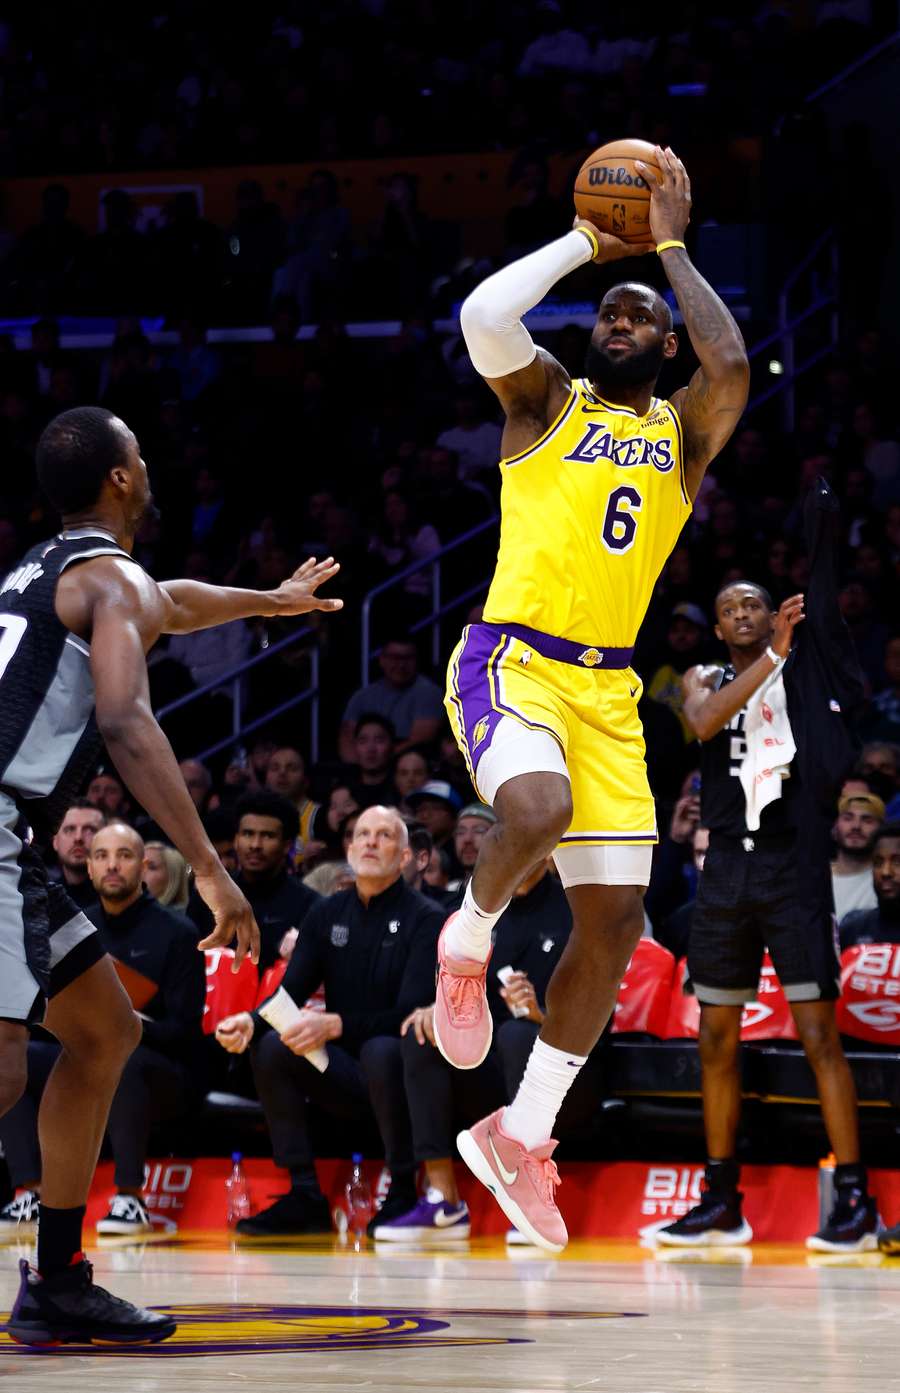  LeBron James #6 of the Los Angeles Lakers takes a shot against the Sacramento Kings in the second half